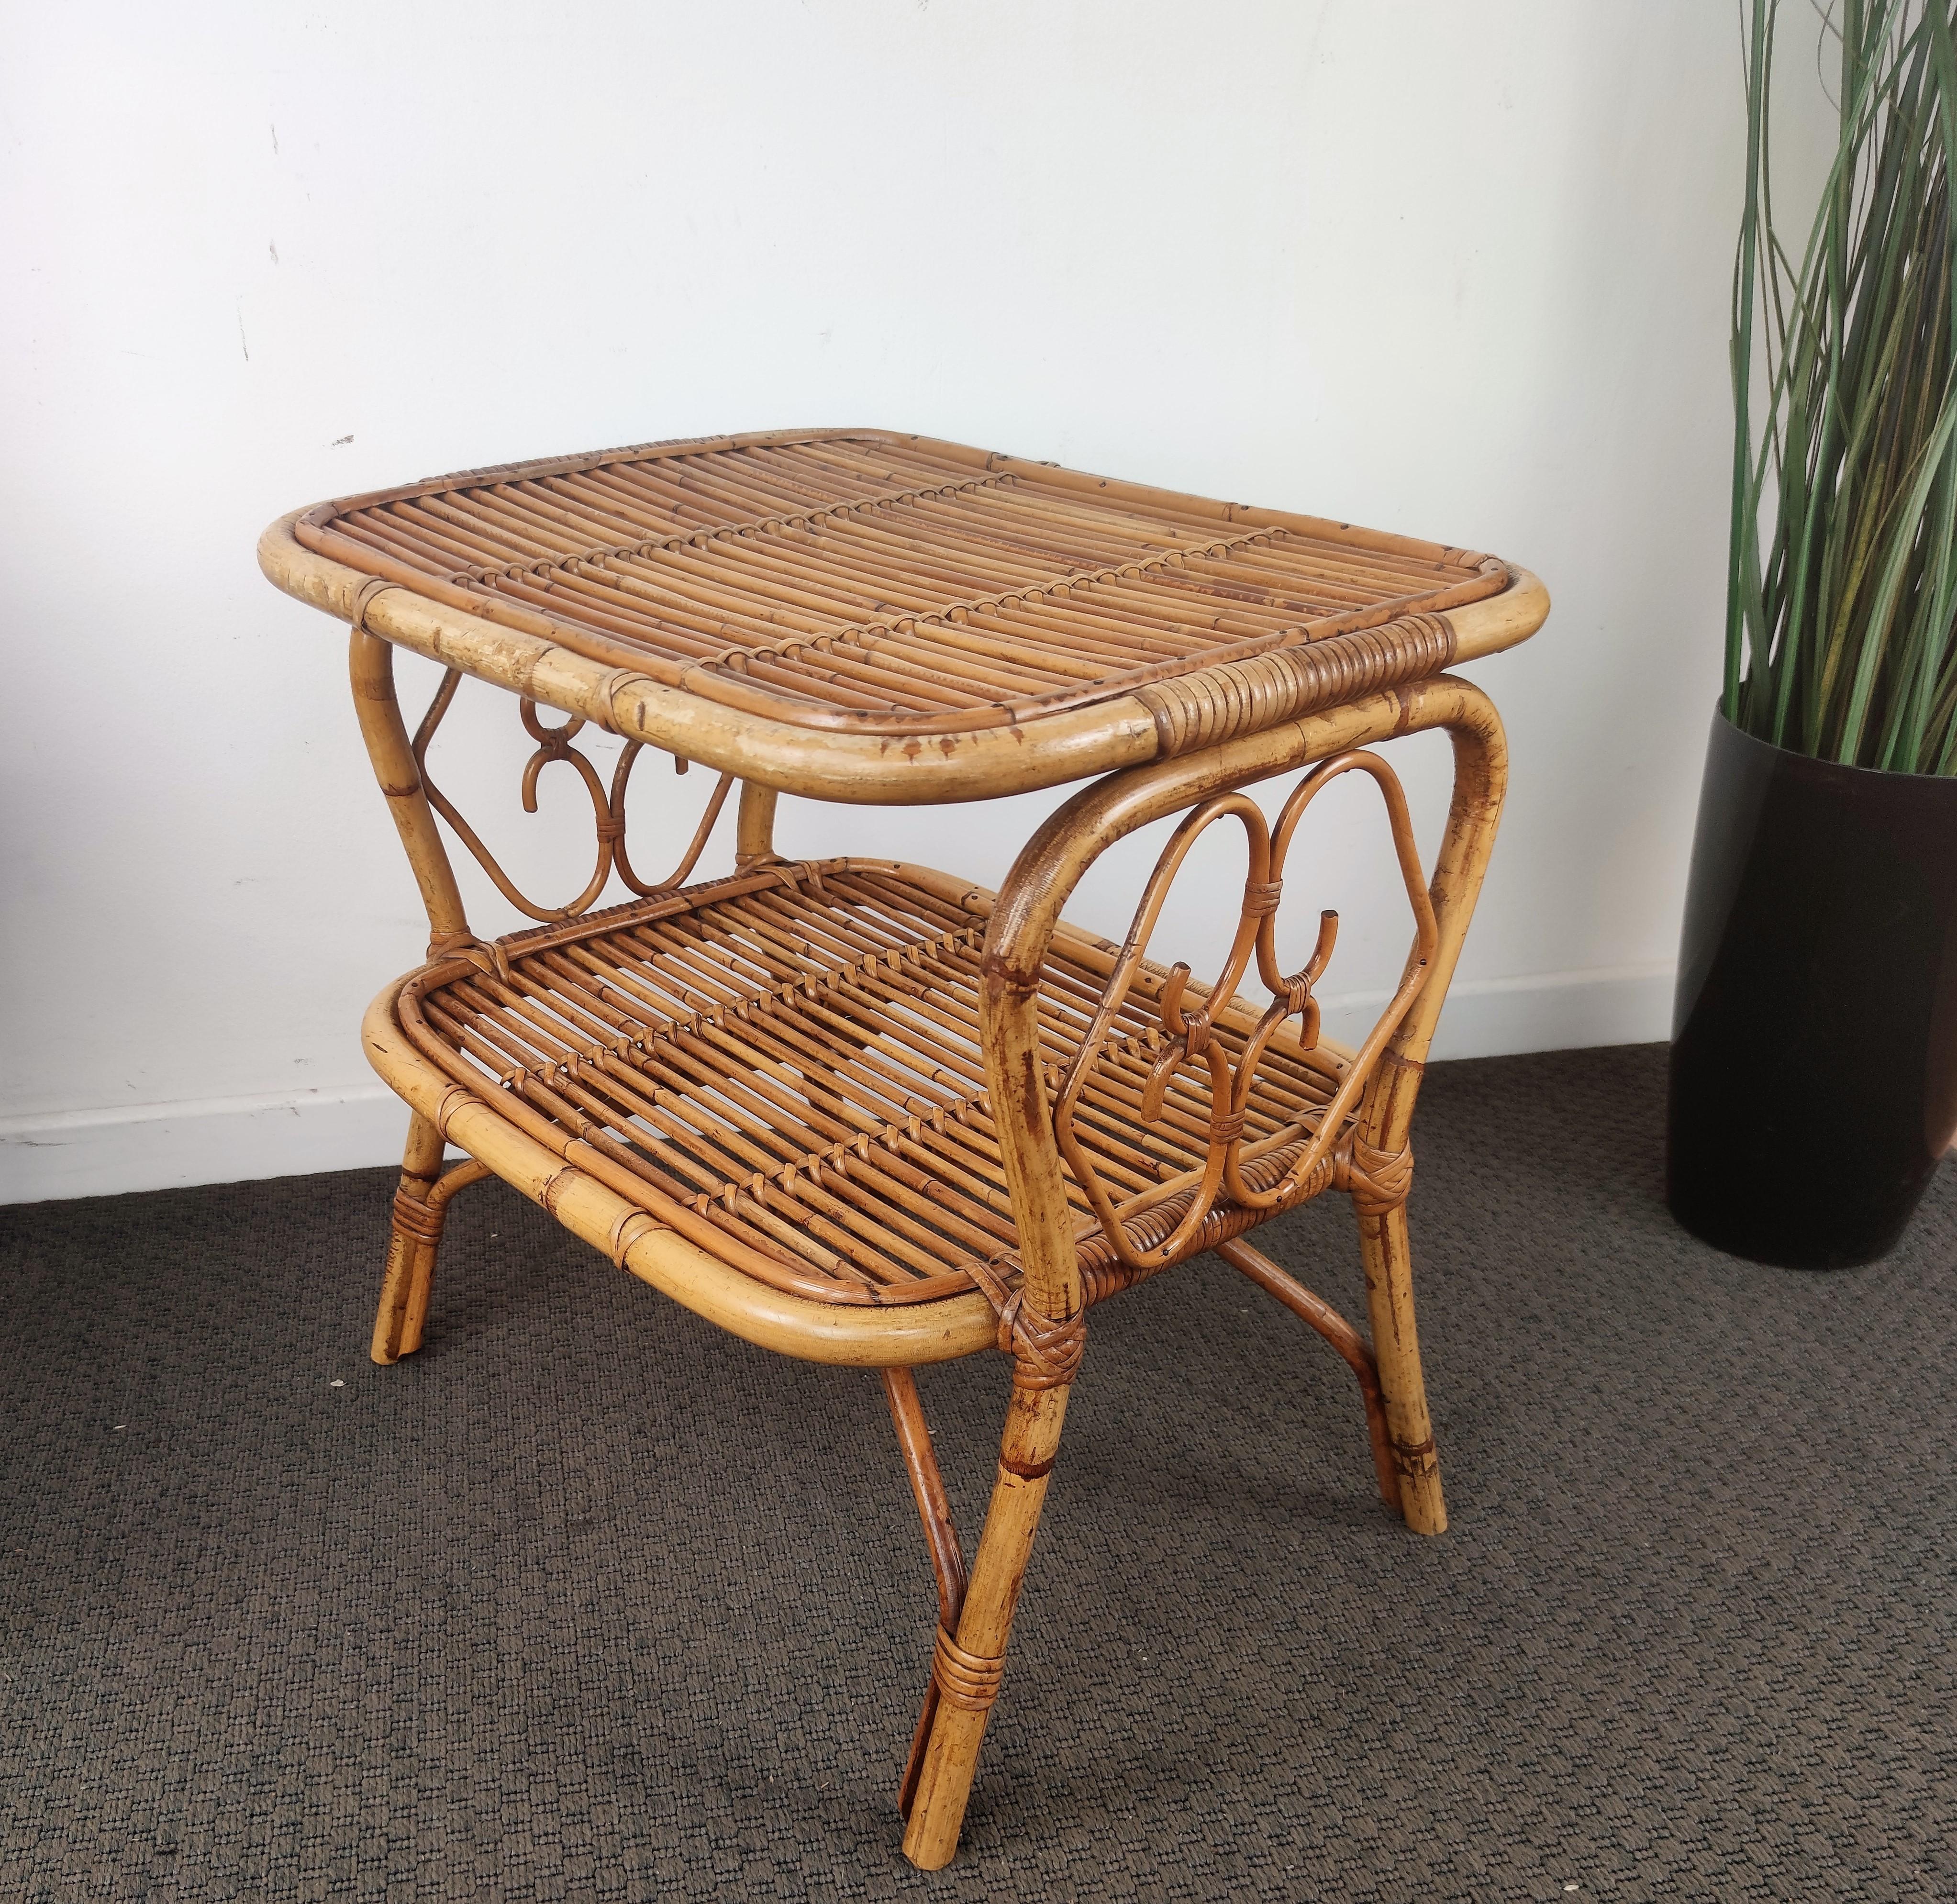 20th Century 1960s Italian Bamboo Rattan Bohemian French Riviera Coffee Table or Side Table